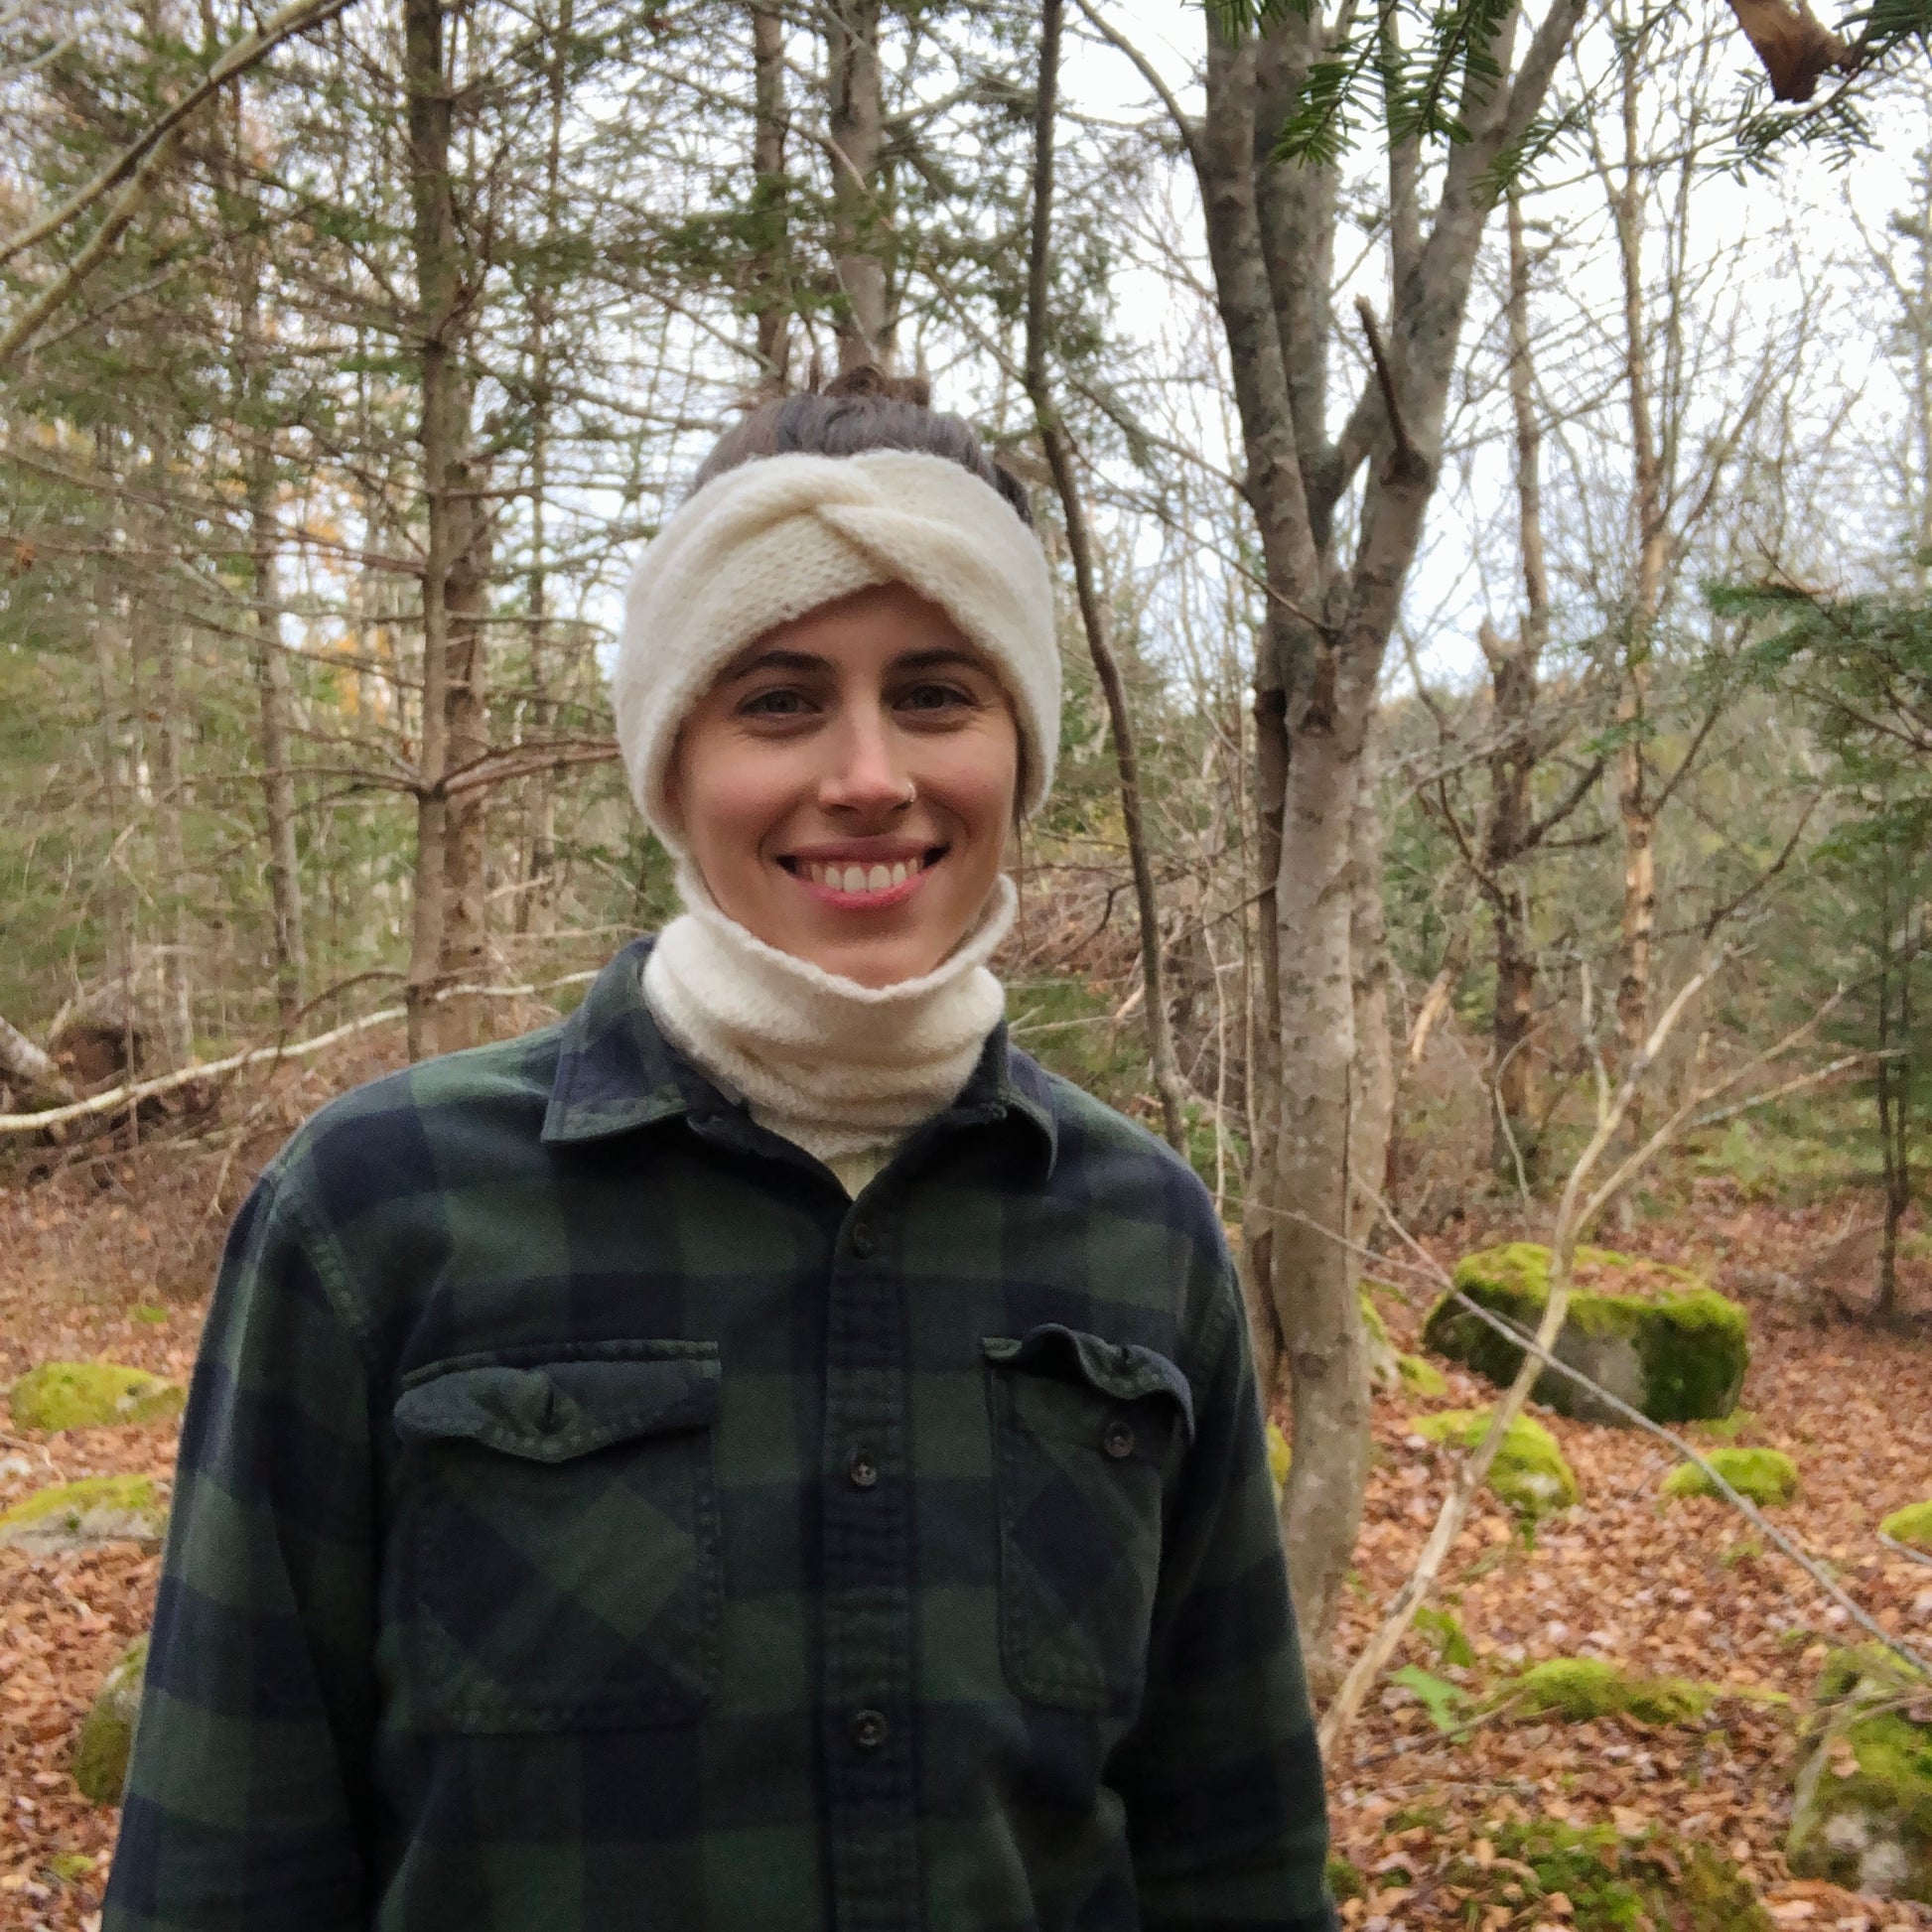 Pam is wearing the white audrey with the white wool neckwarmer as well. The two white and fuzzy wool options match perfectly together. She is also wearing a dark green plaid shirt and is smiling at the camera in the woods. 